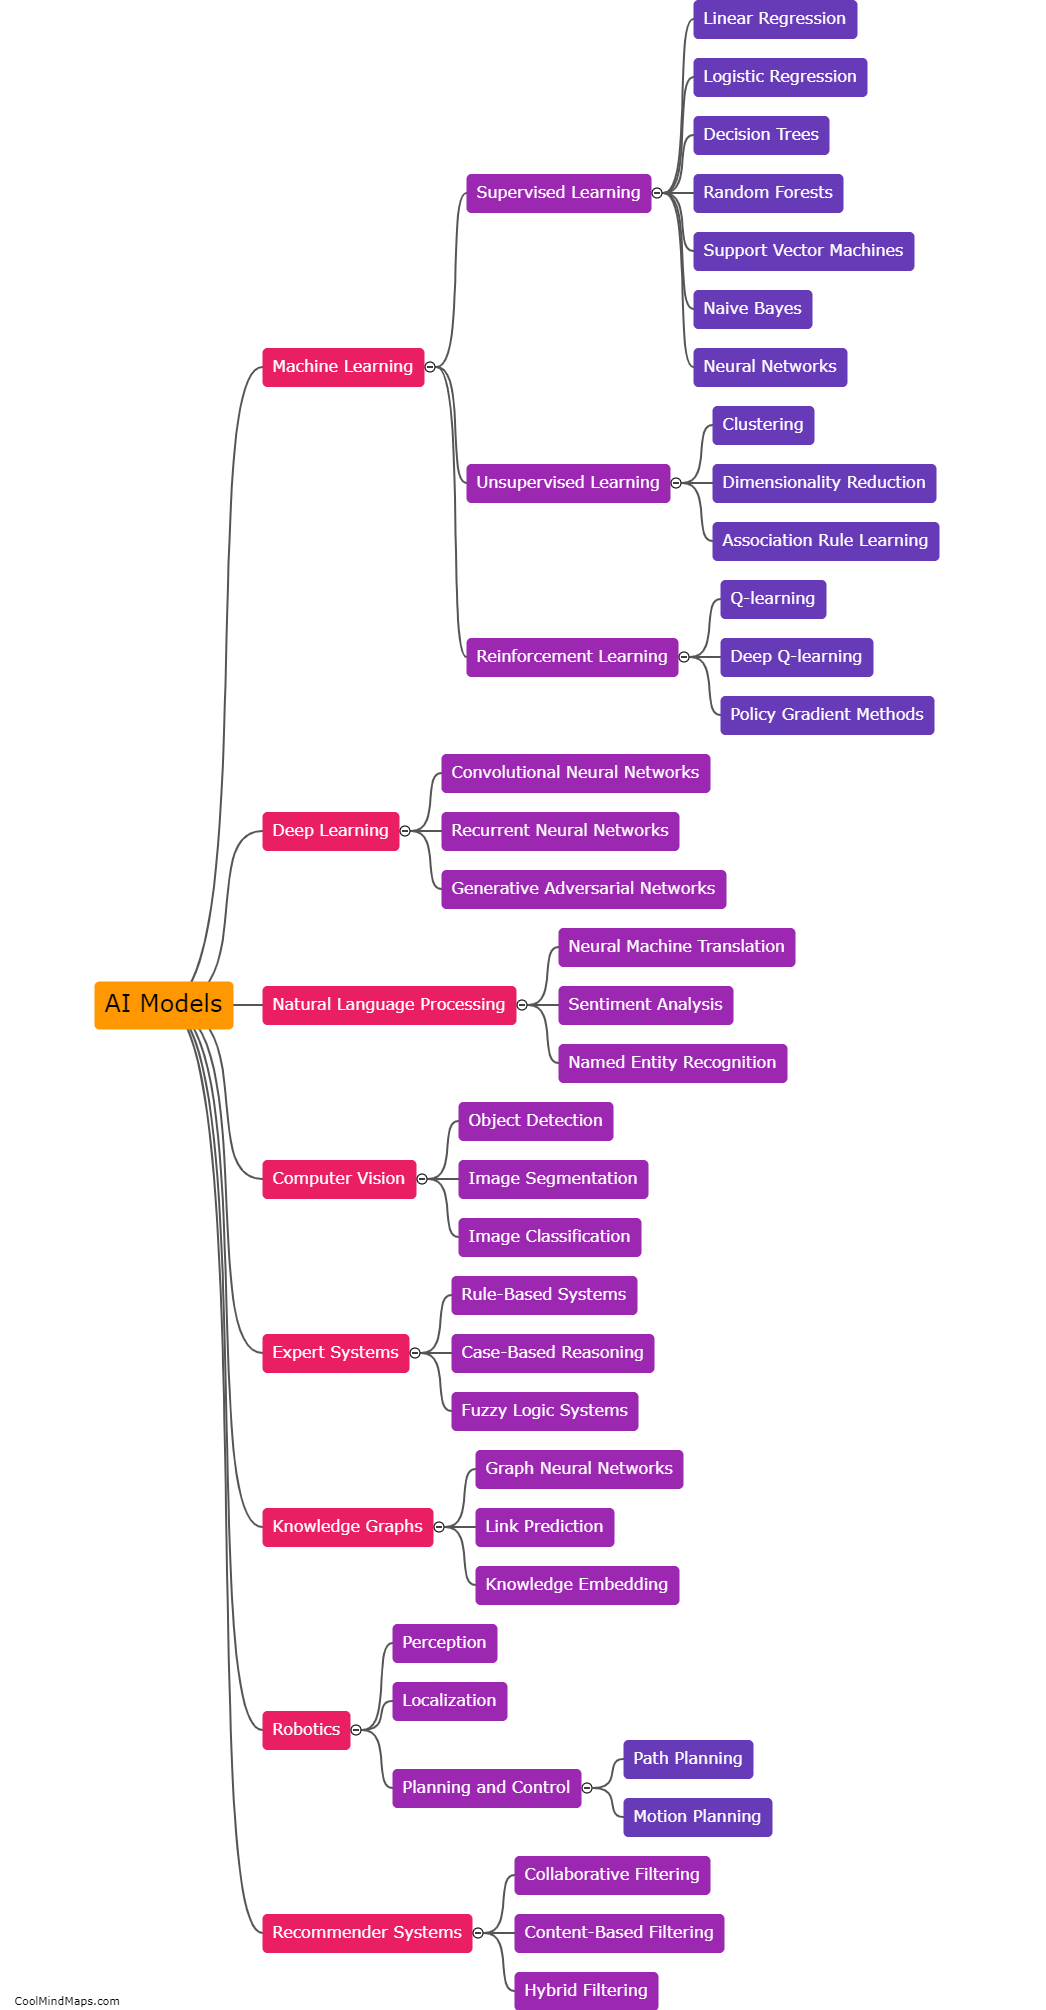 What are the different AI models used in coolmindmaps?